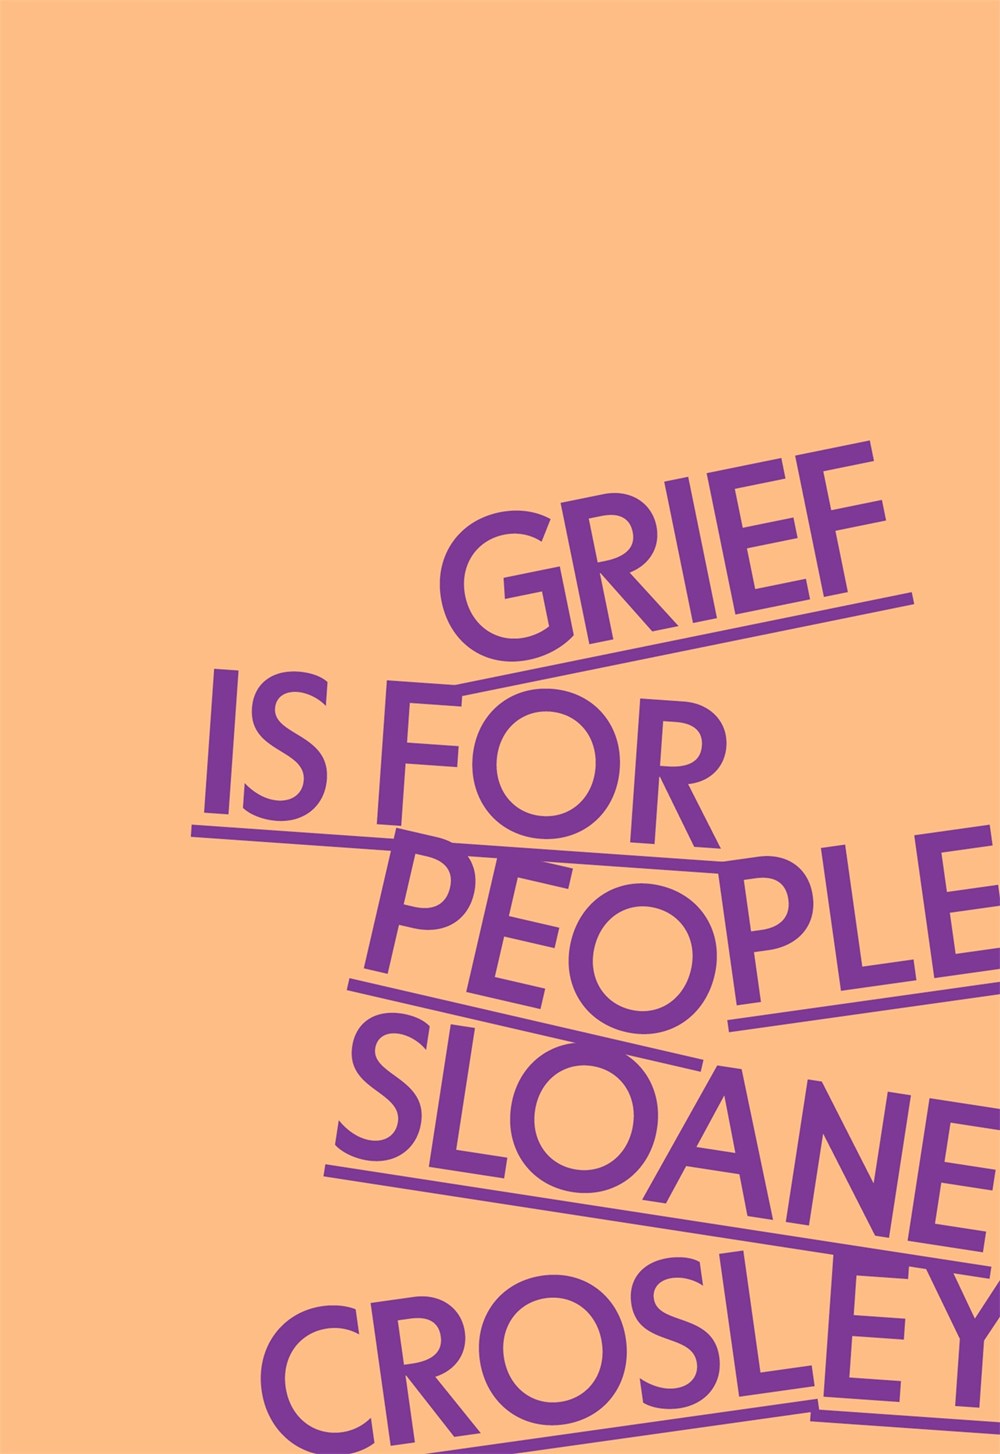 Grief Is for People by Sloane